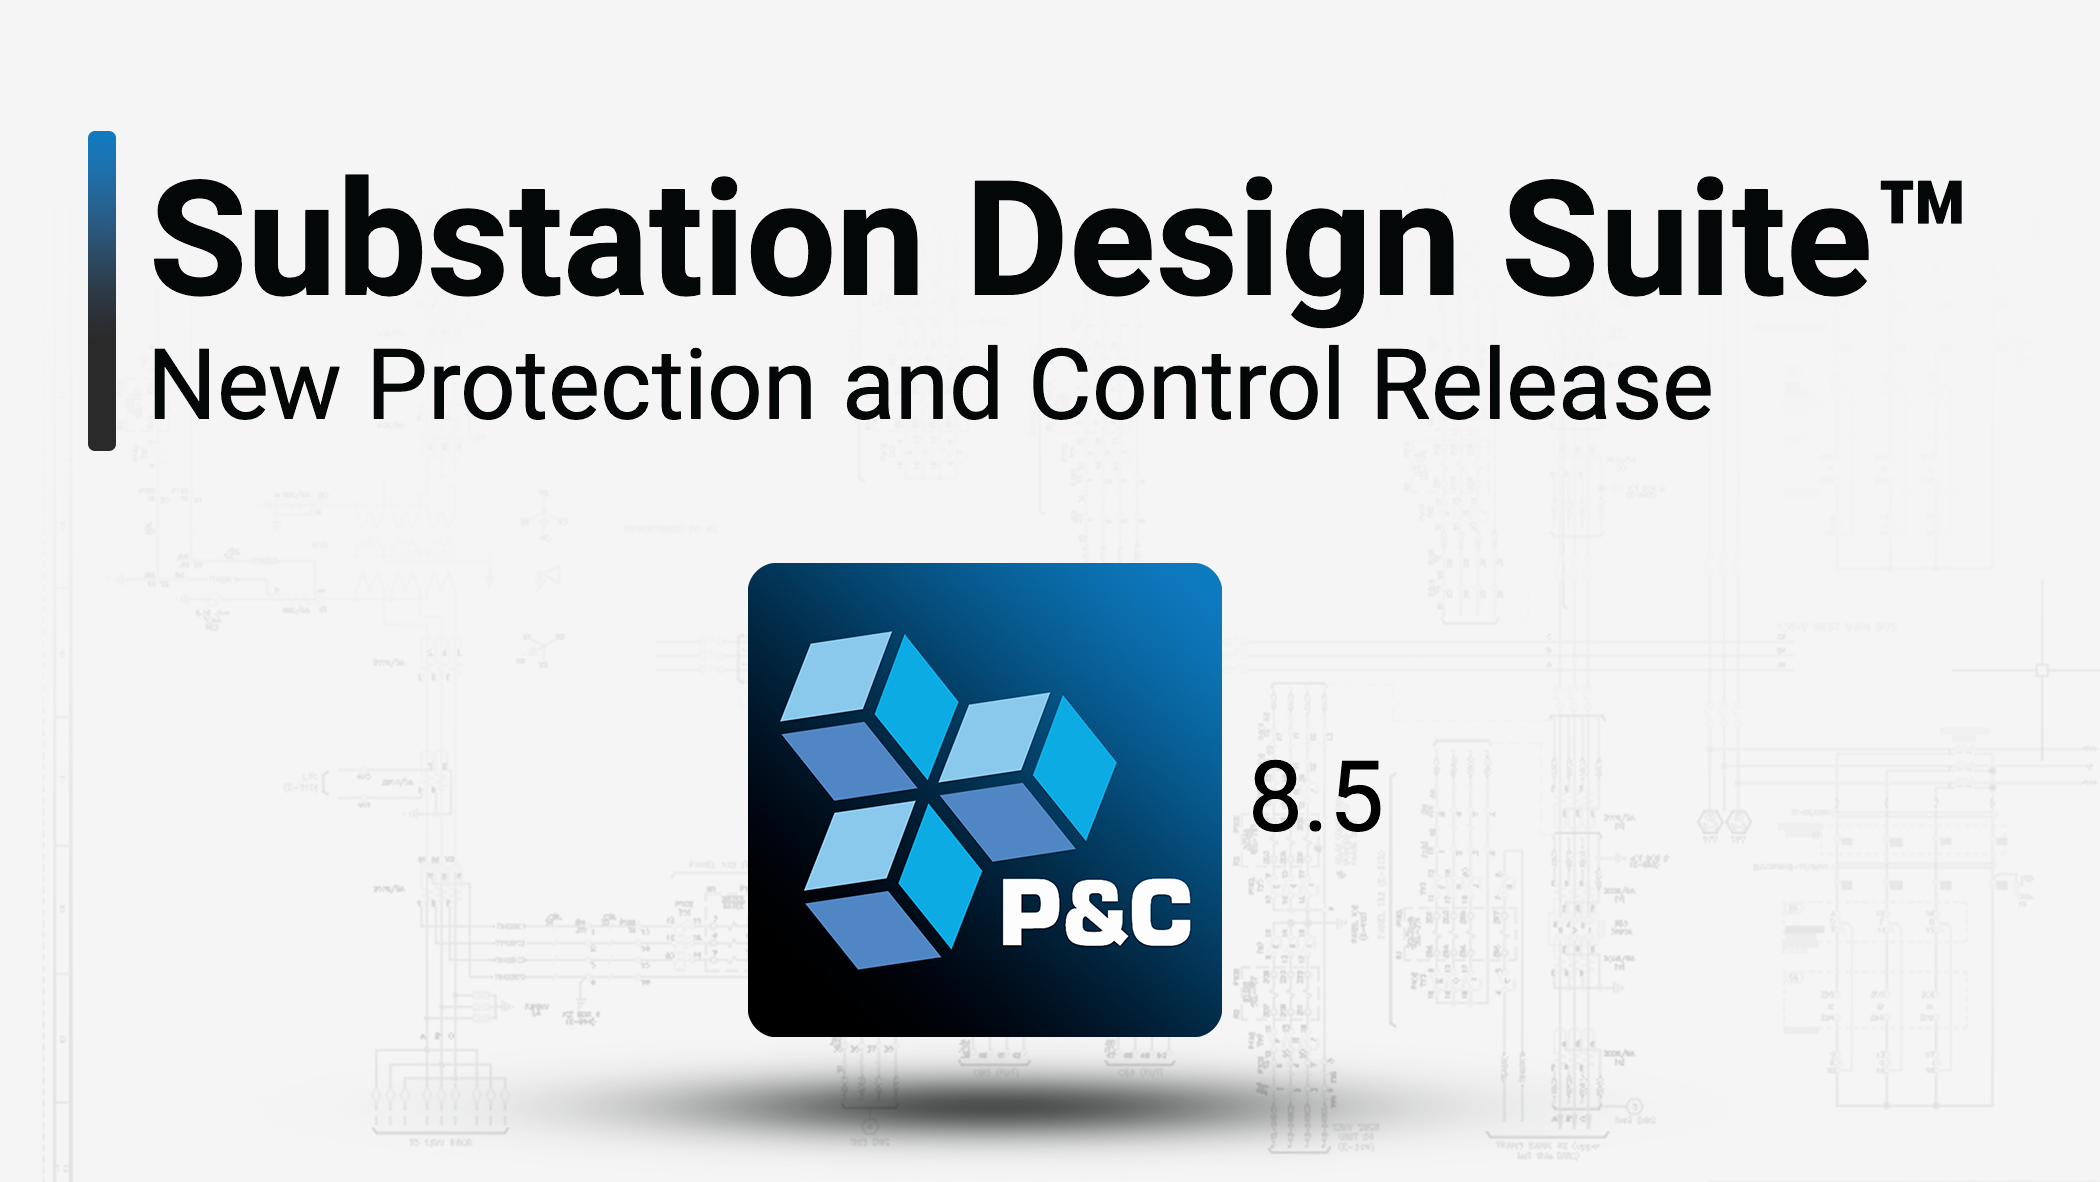 Protection and Control Release 8.5